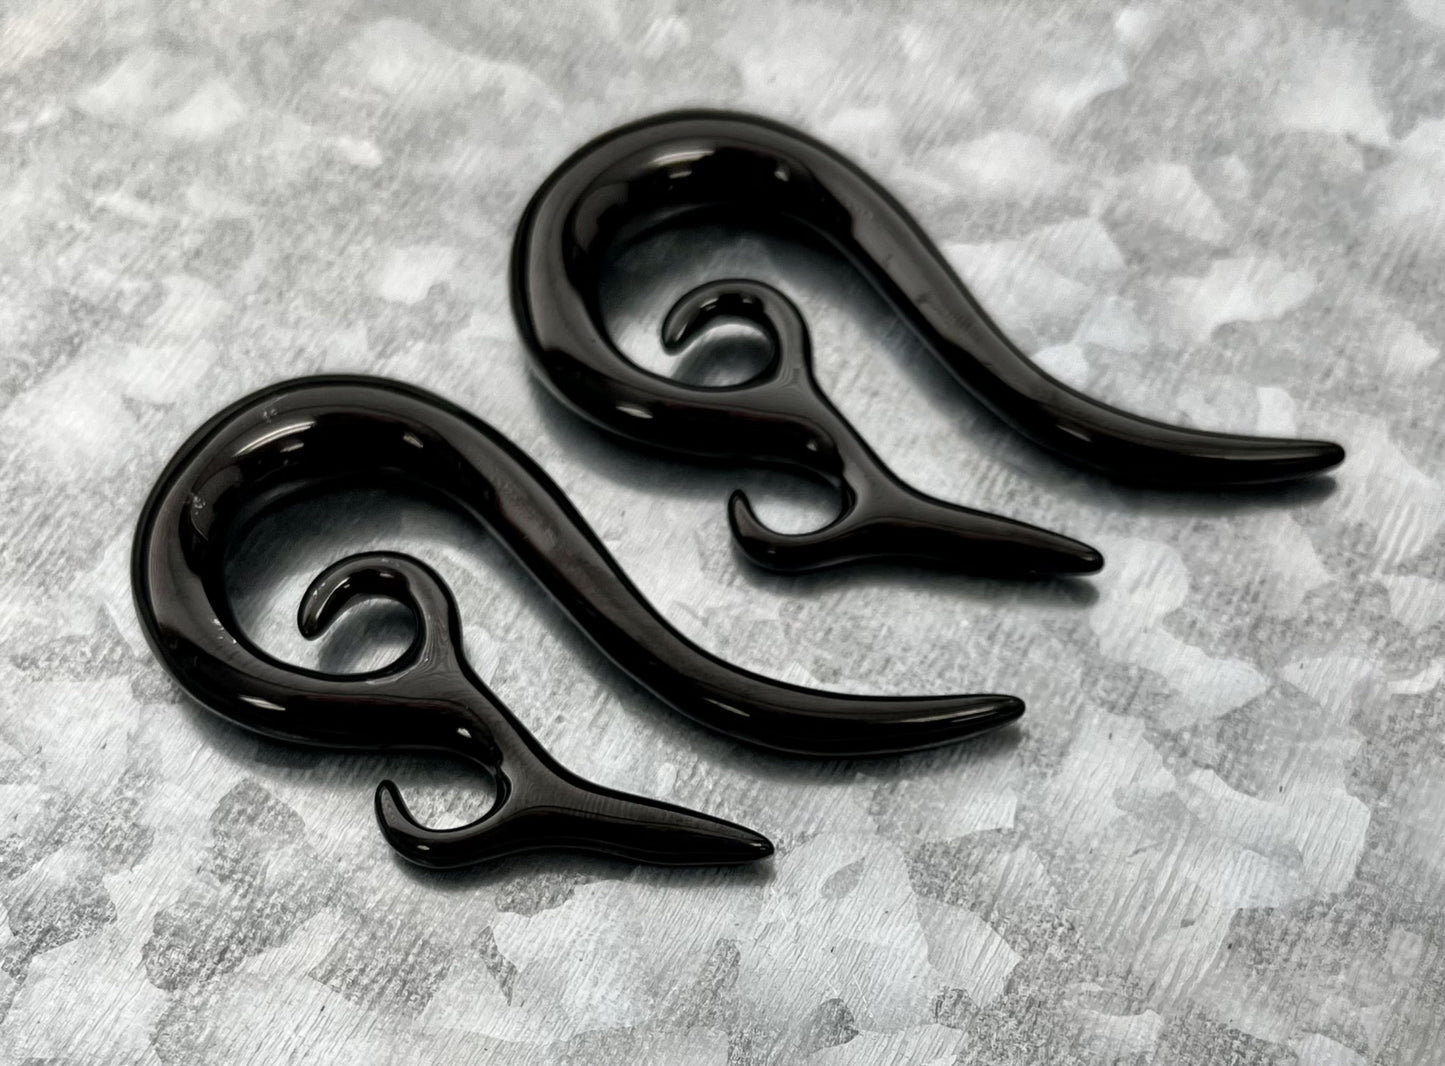 PAIR of Black Tribal 316L Surgical Steel Hanging Tapers Expanders - Gauges 14g (1.6mm) thru 0g (8mm) Available!